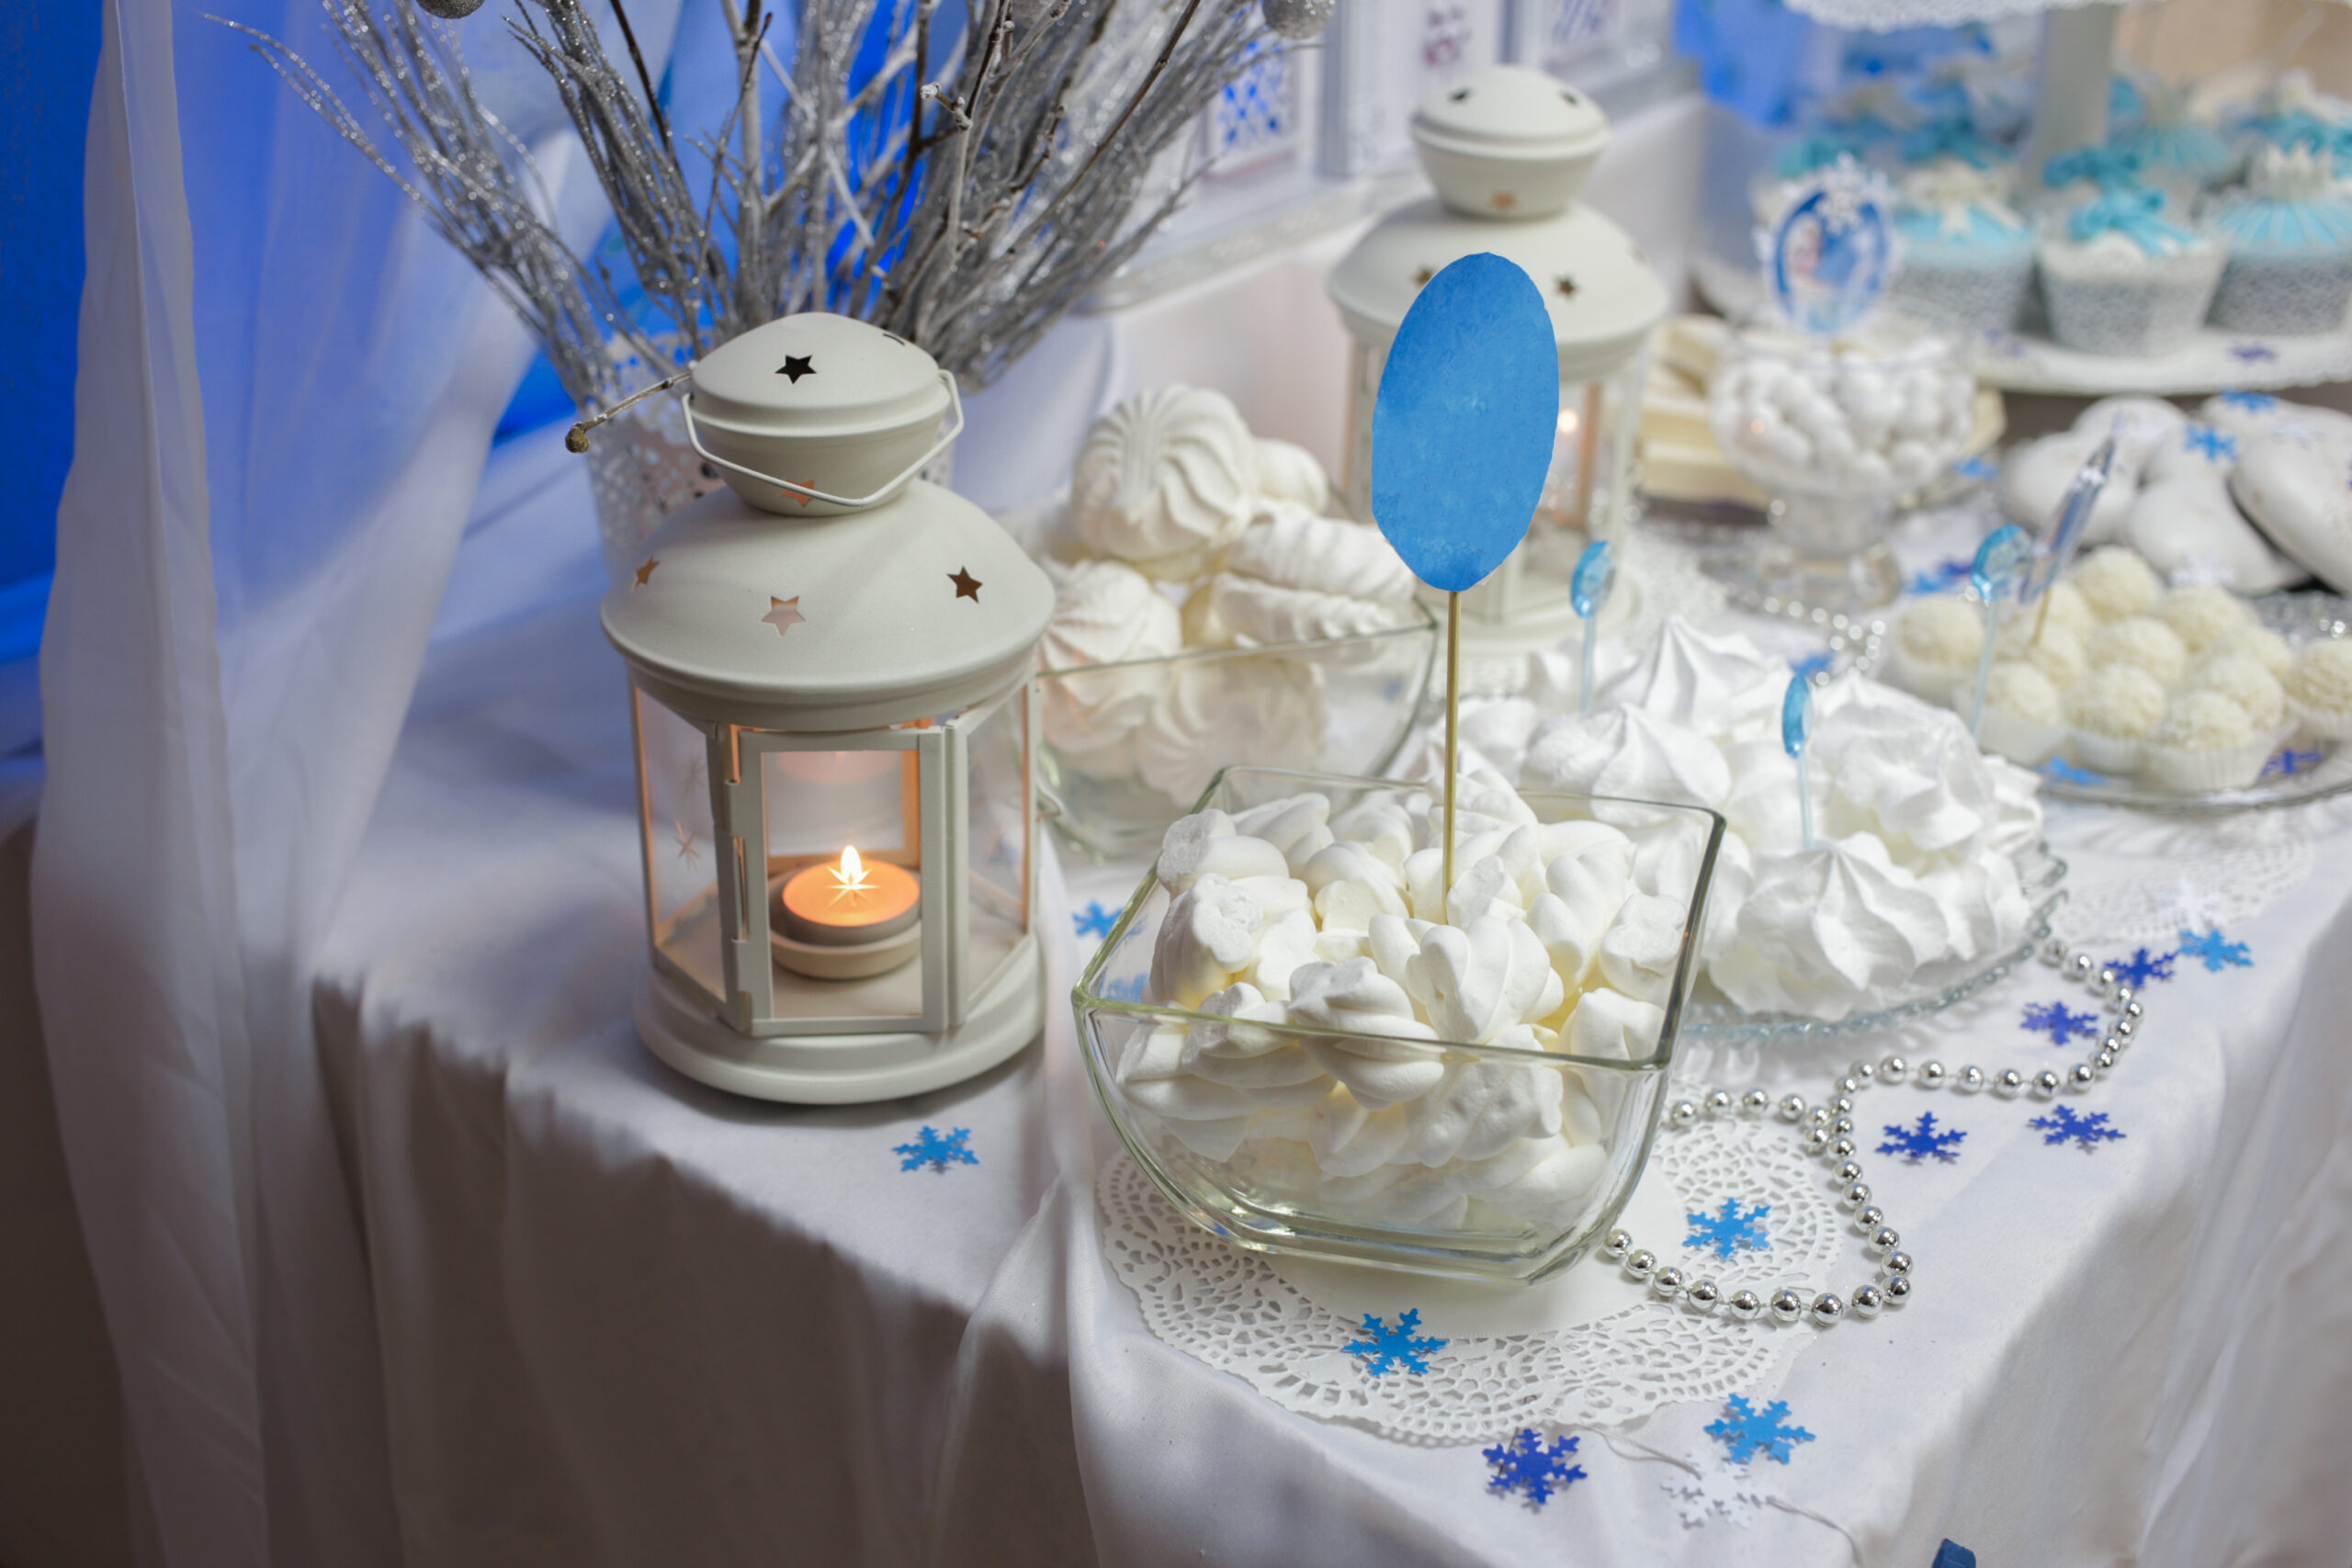 Festive table with sweets in a white color scheme. Side lit lantern with a candle.